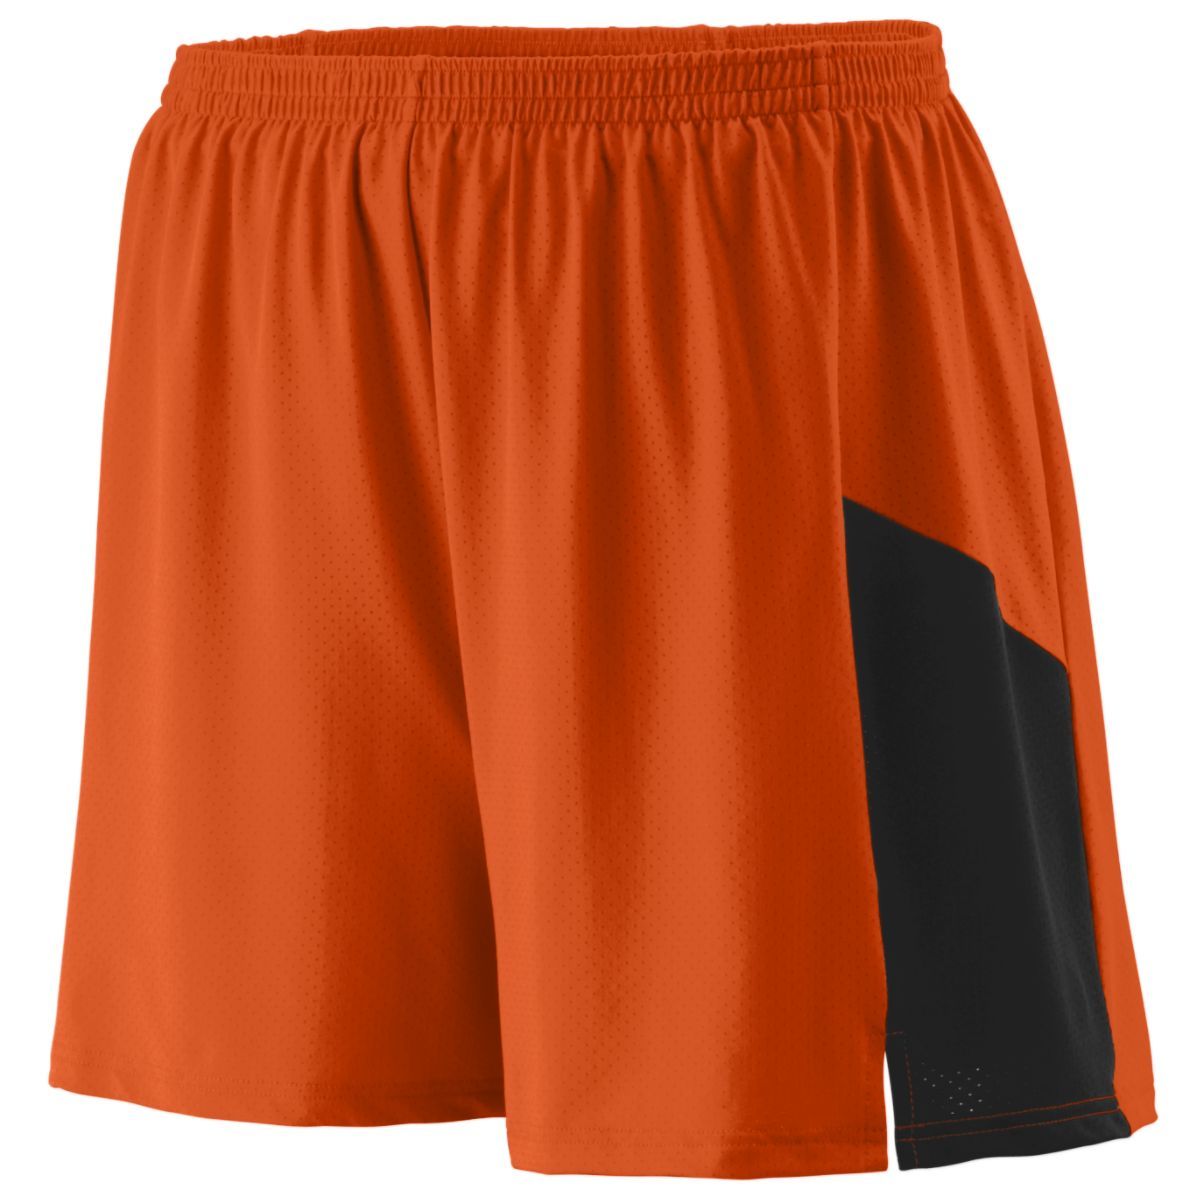 Augusta Sportswear Youth Sprint Shorts in Orange/Black  -Part of the Youth, Youth-Shorts, Augusta-Products, Track-Field product lines at KanaleyCreations.com